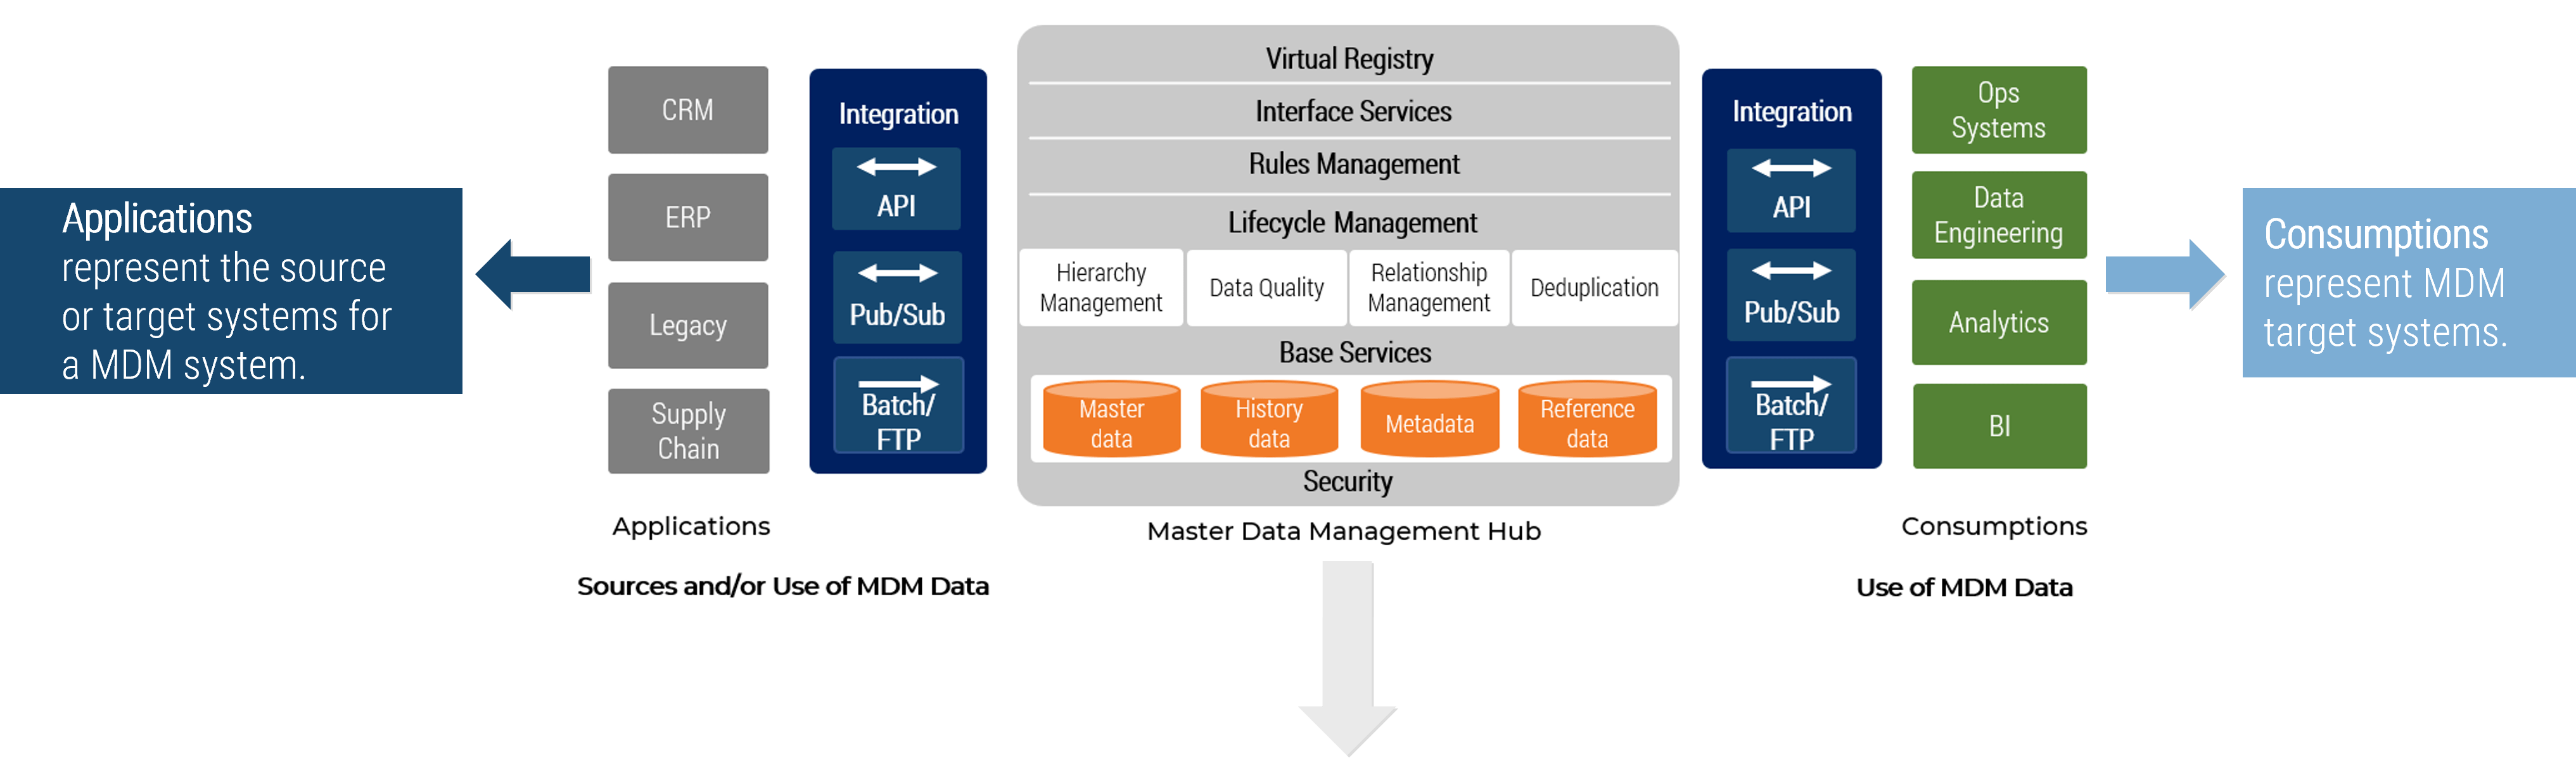 The image contains a screenshot of Info-Tech Research Group's Reference MDM Architecture.